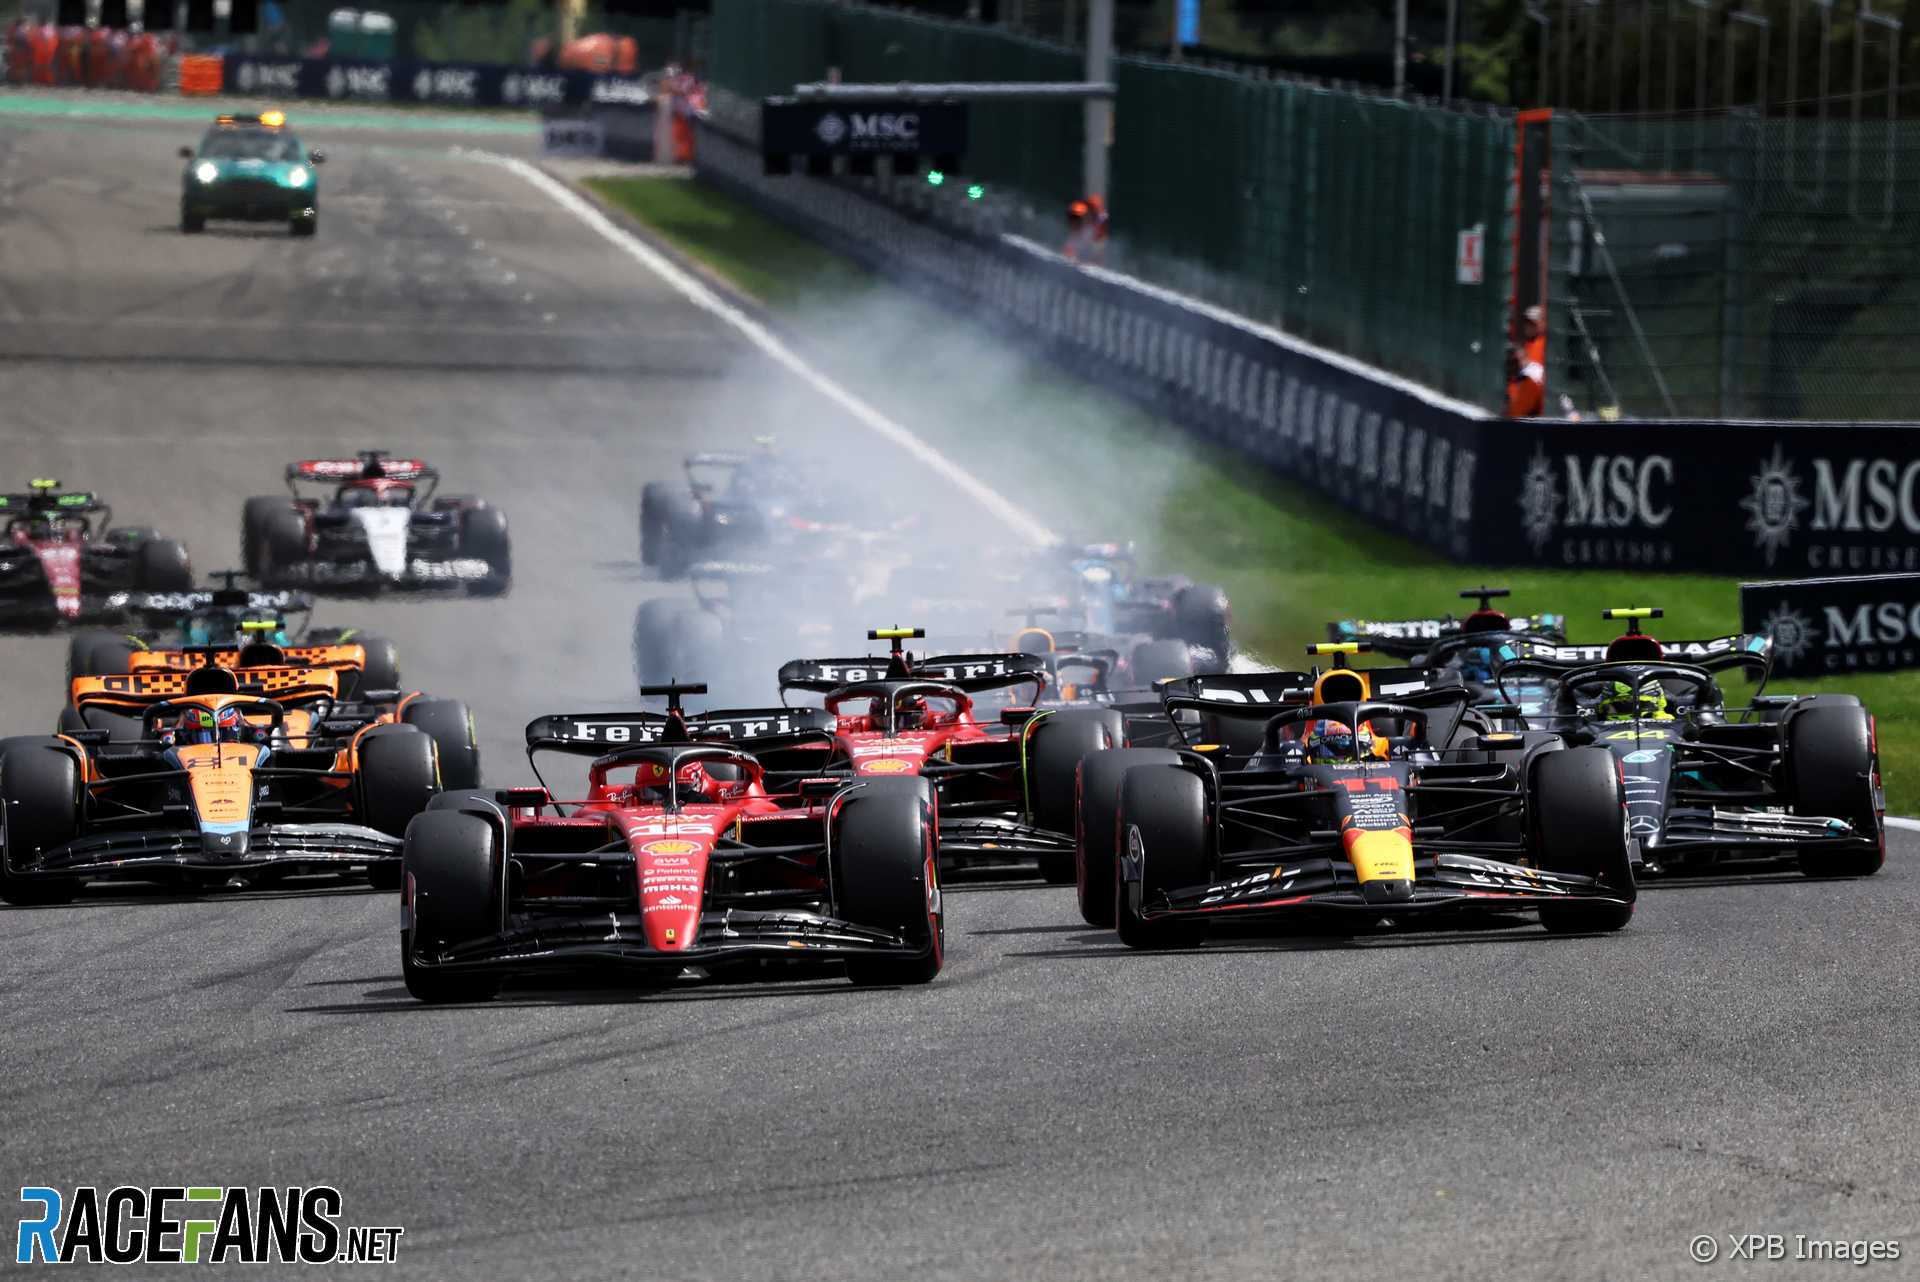 The 2023 Belgian Grand Prix was held at Spa-Francorchamps and won by Max Verstappen